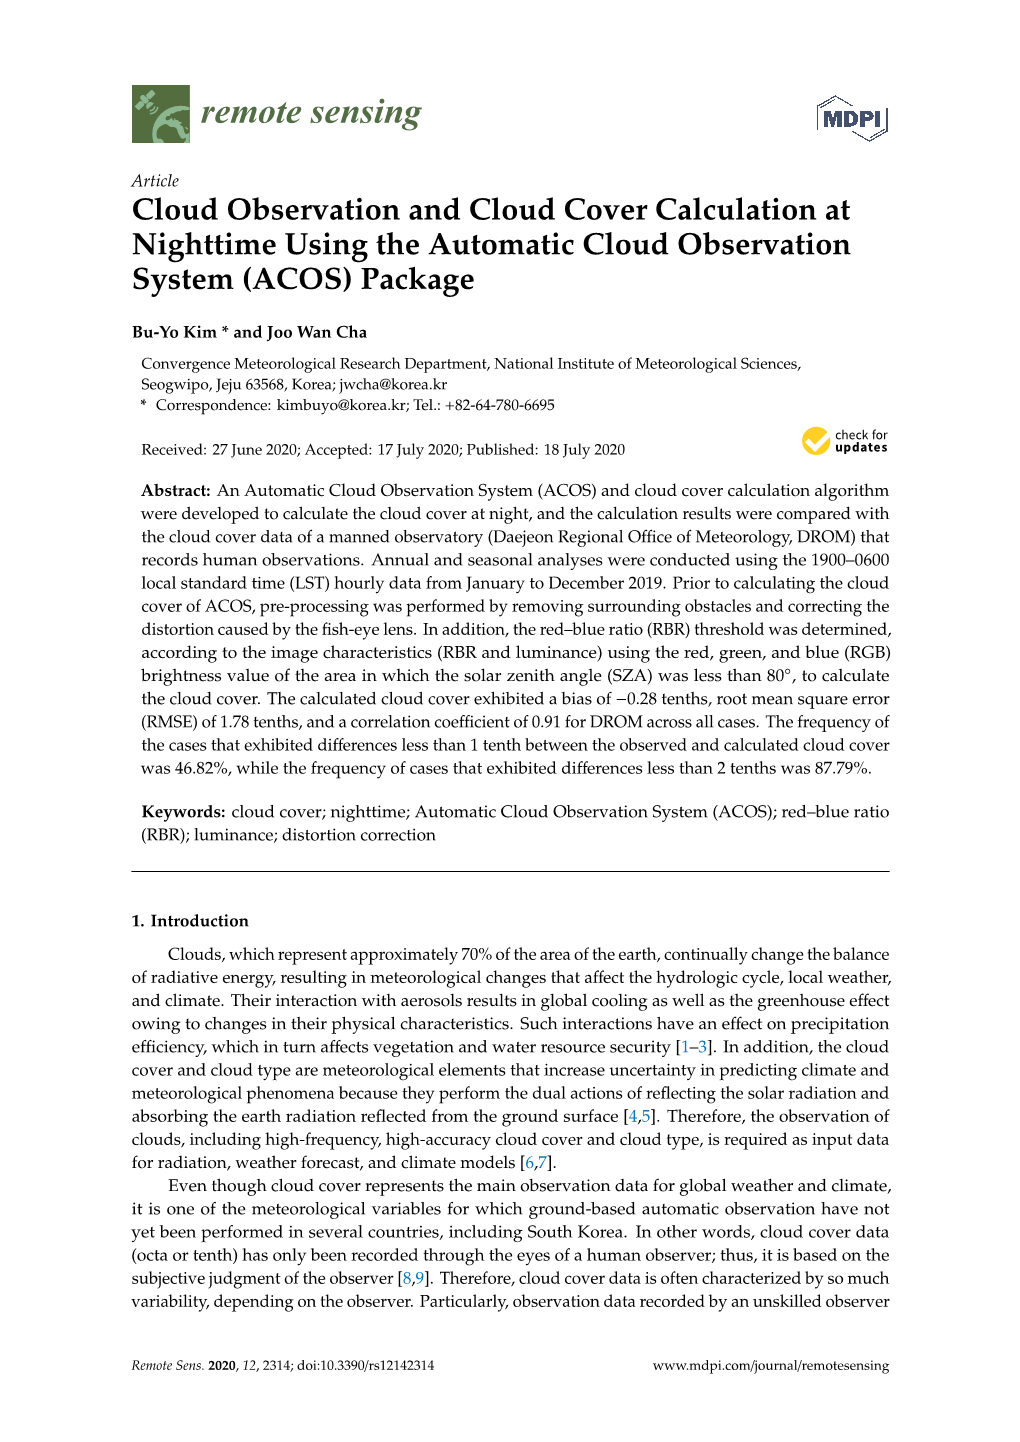 Cloud Observation and Cloud Cover Calculation at Nighttime Using the Automatic Cloud Observation System (ACOS) Package